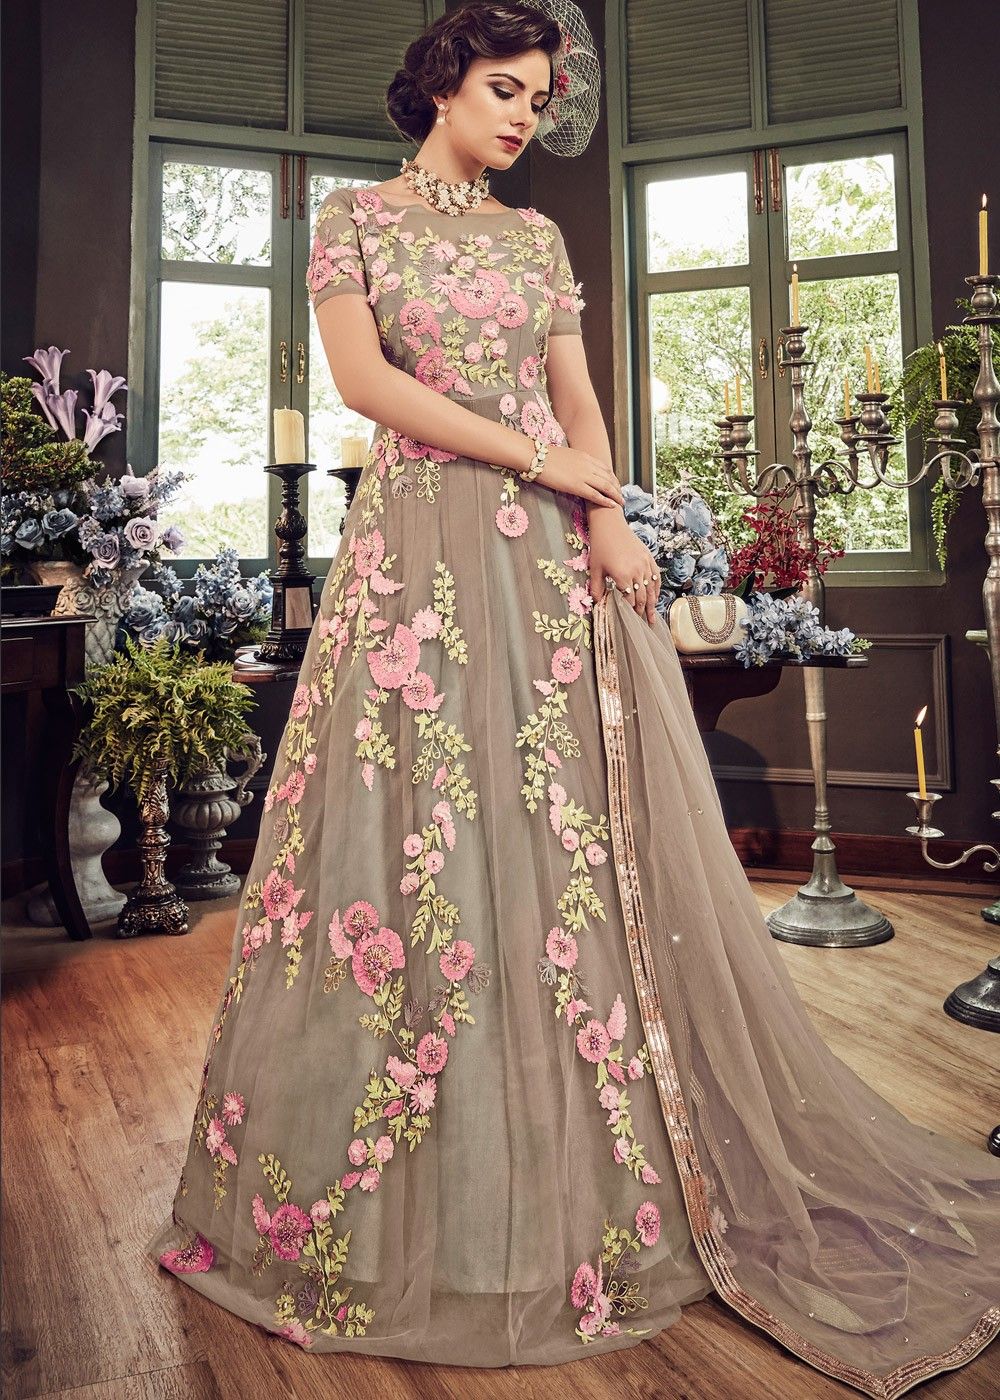 Details more than 160 net gown cutting best